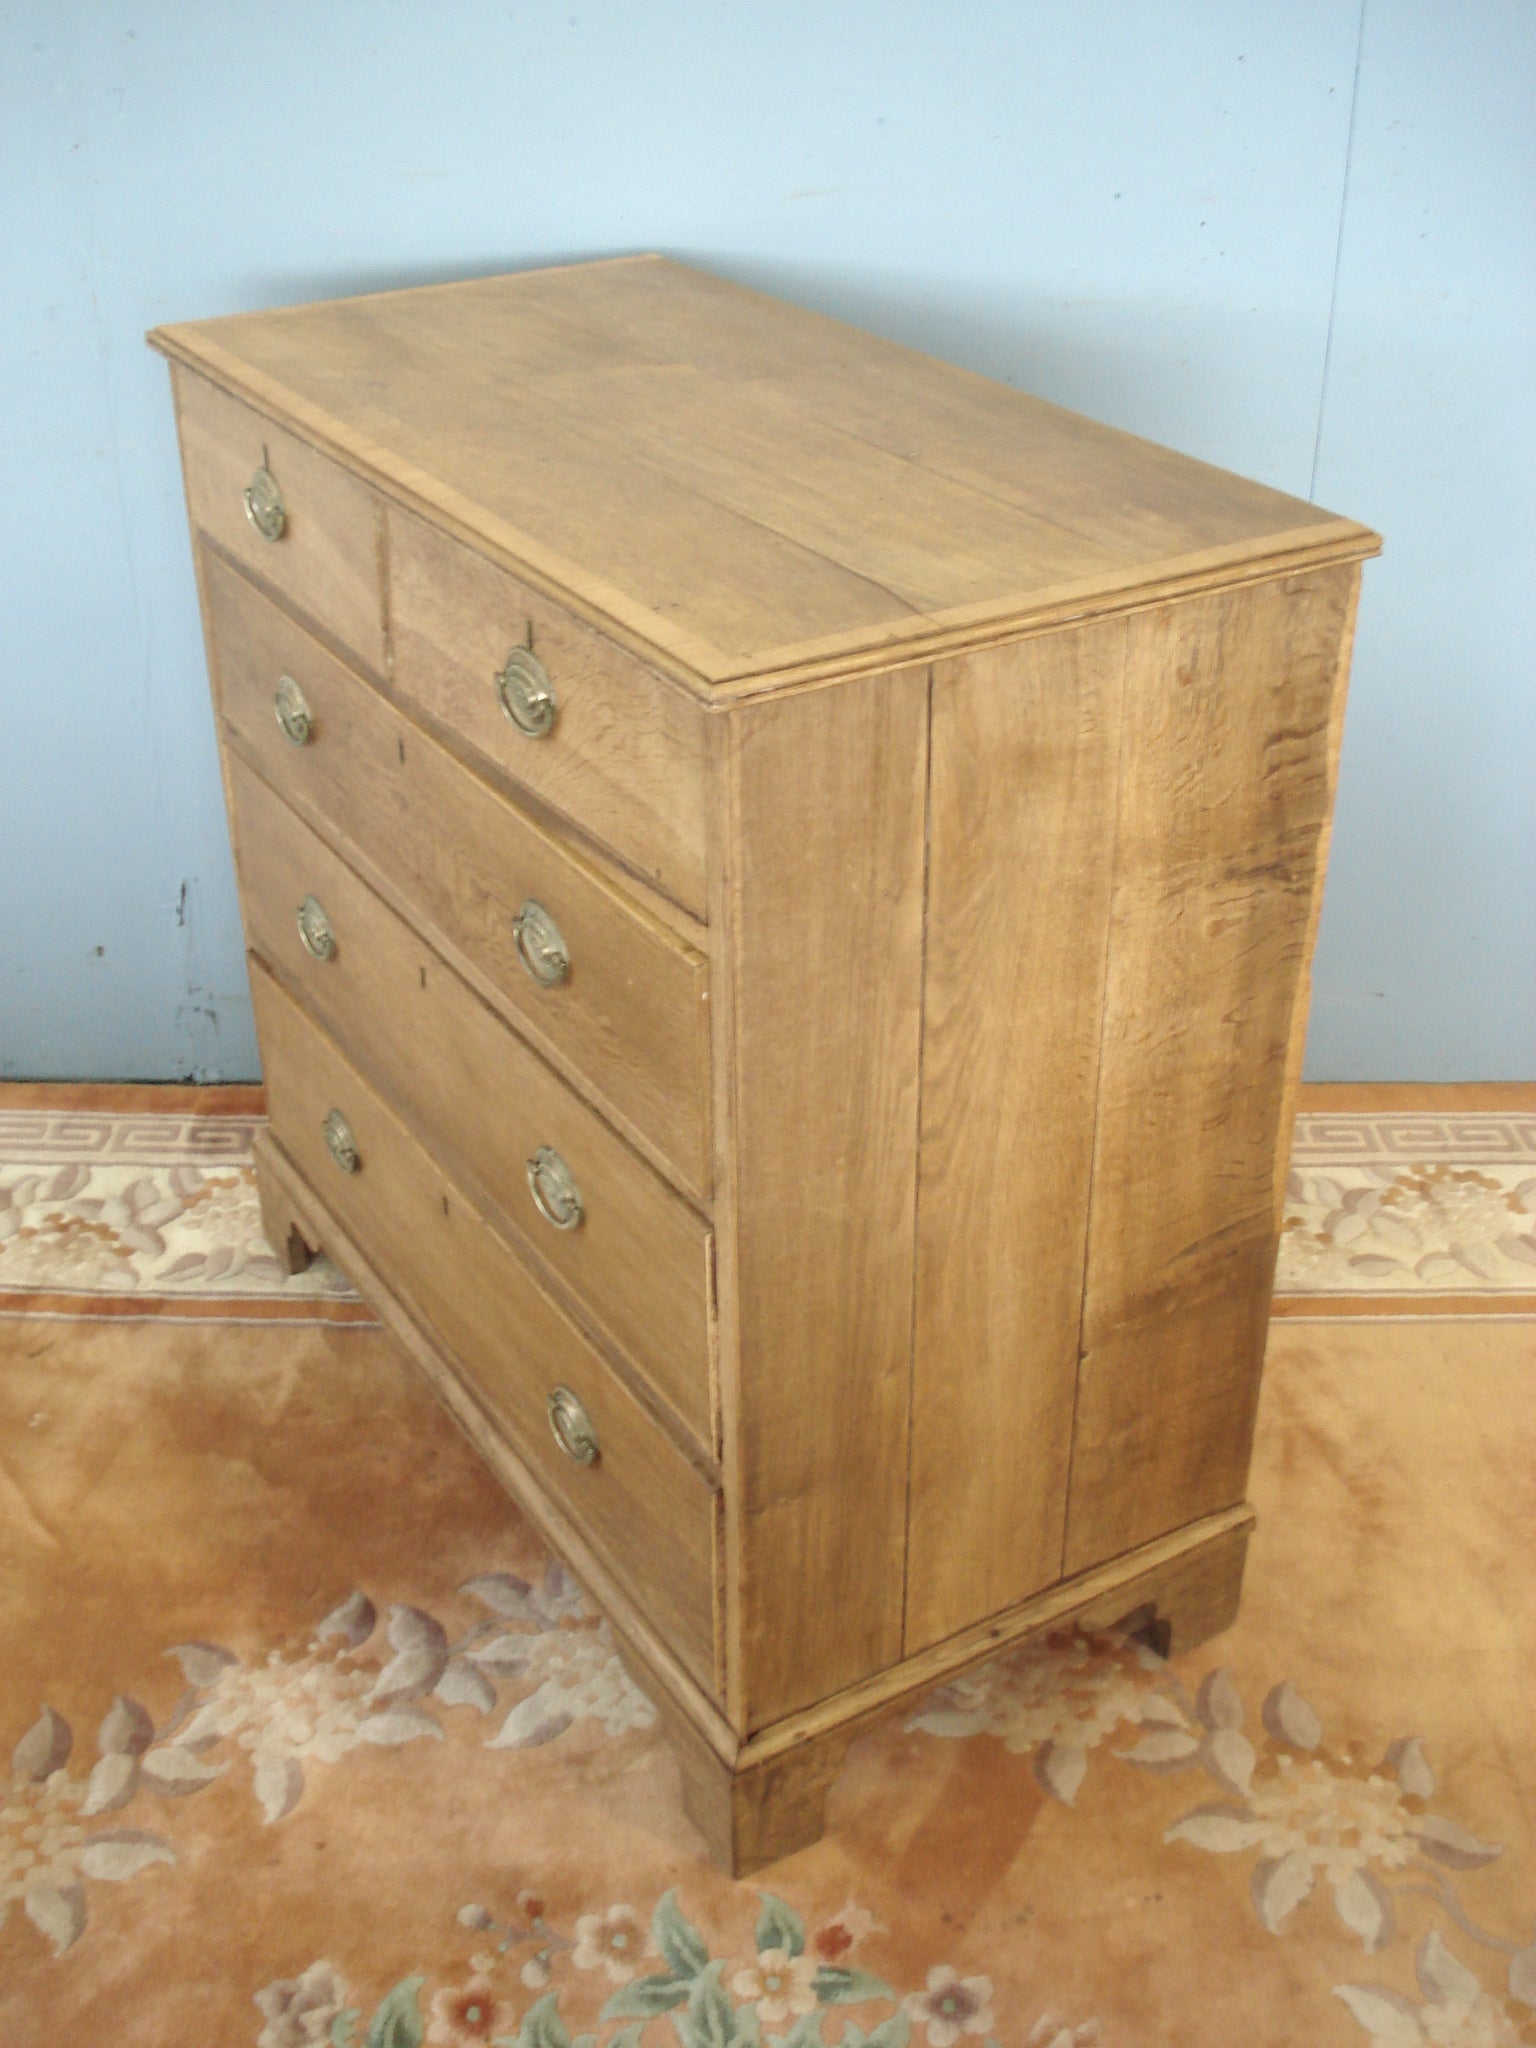 Circa 1830 Cross banded blonde oak five drawer chest